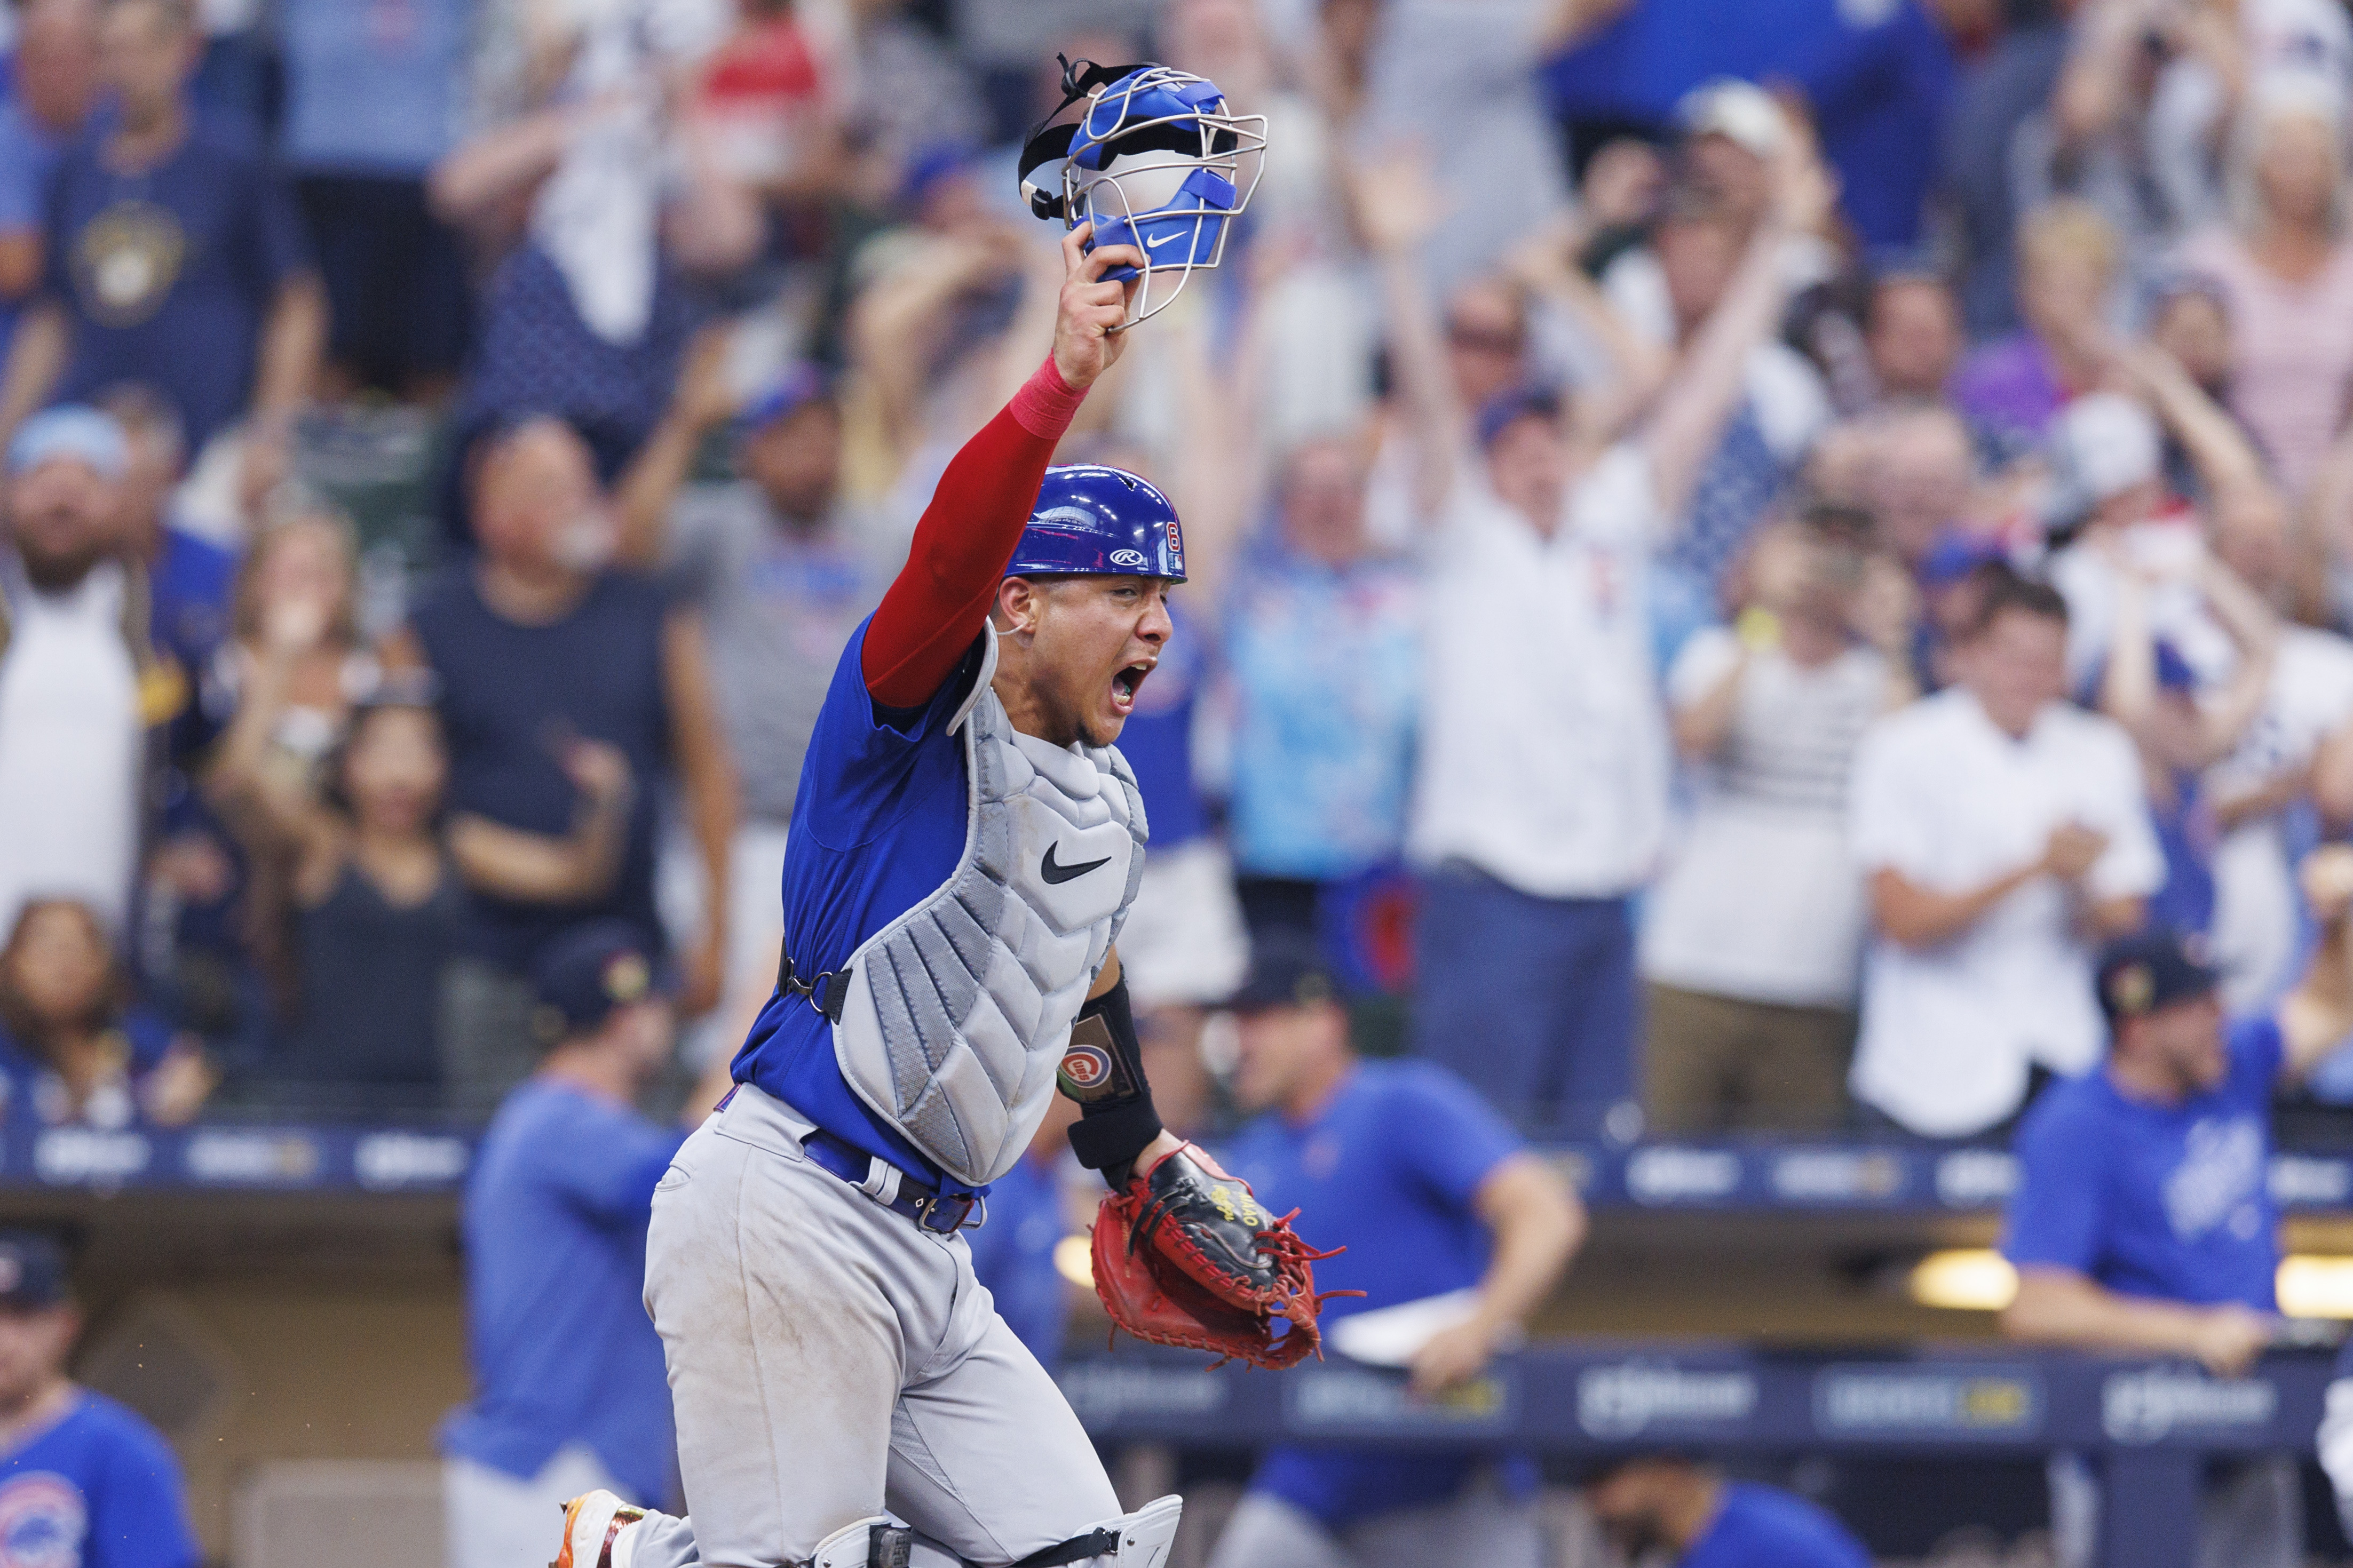 MLB: Chicago Cubs at Milwaukee Brewers, Fieldlevel